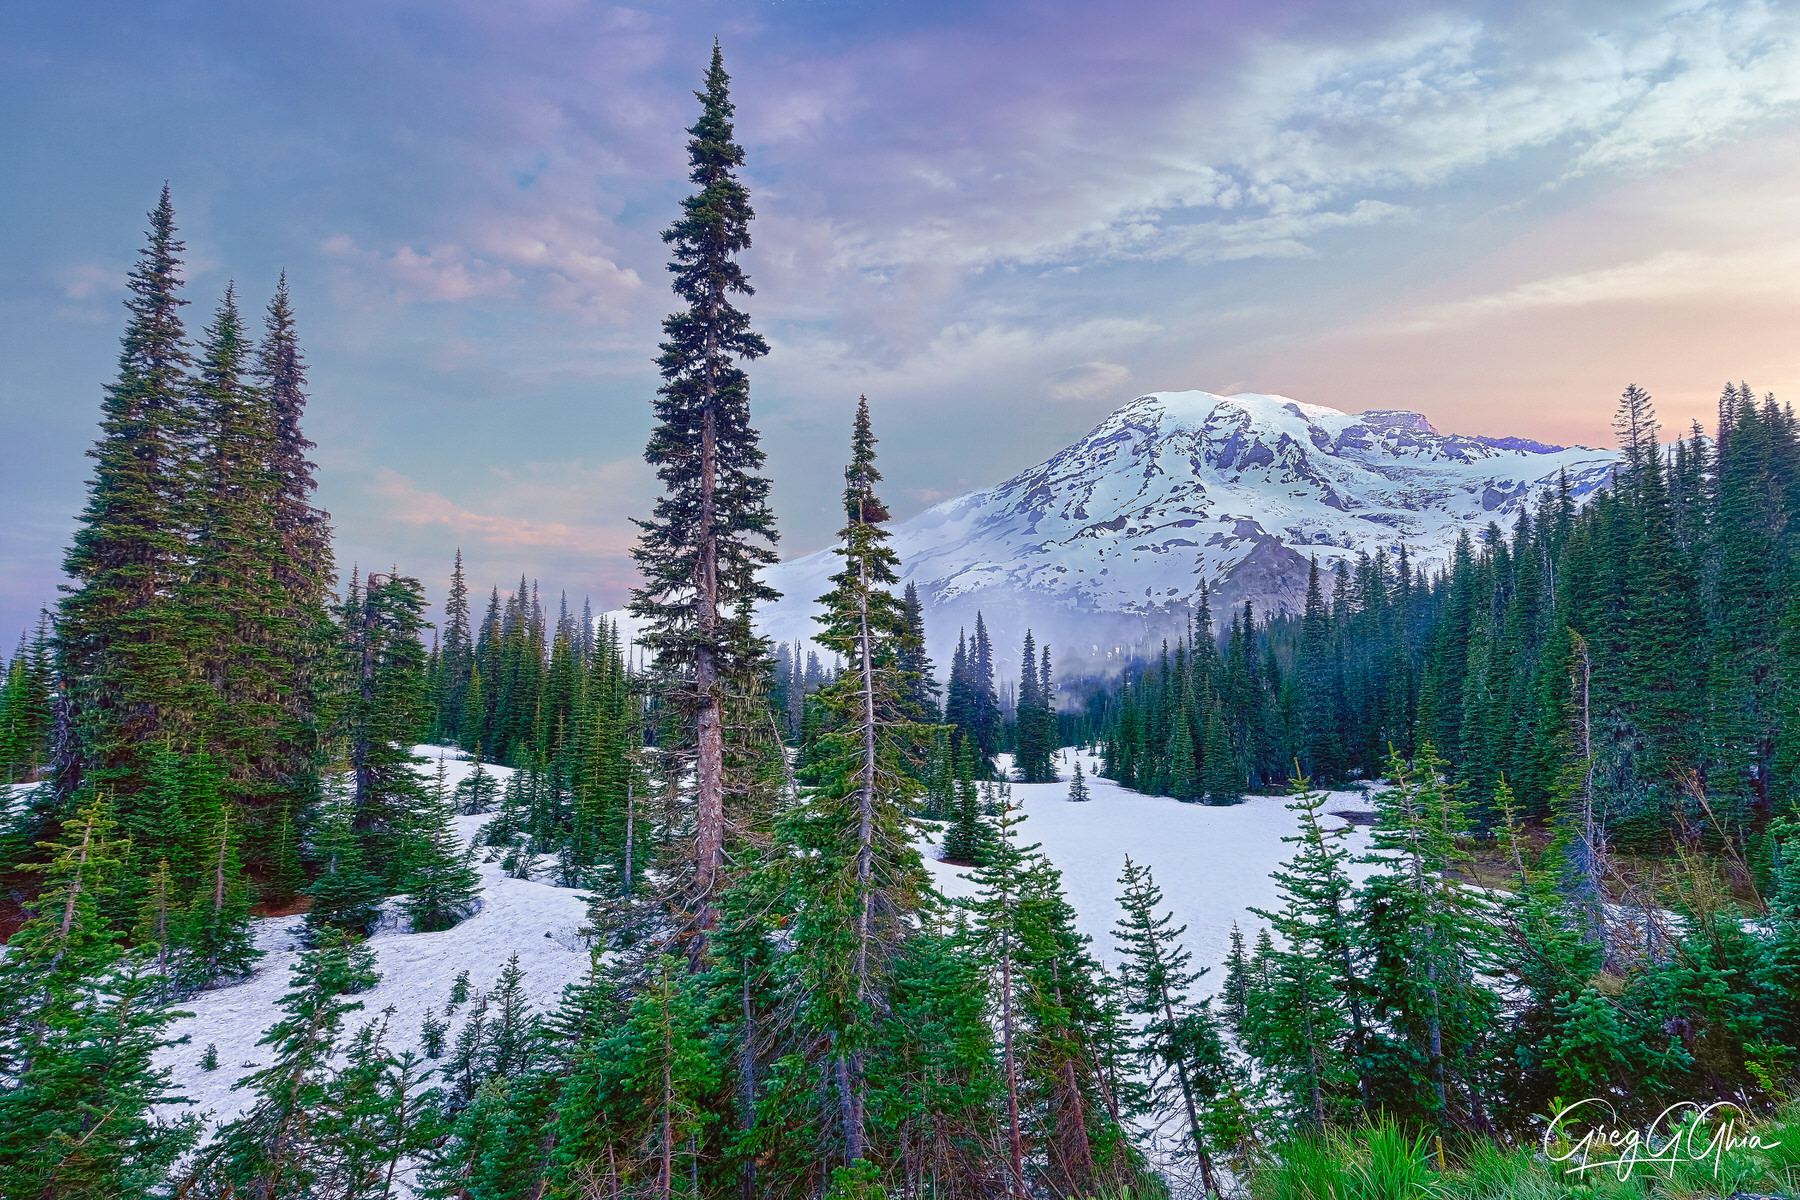 Evergreens at the base of Mount Rainier are surrounded by snow while Mount Rainier rises in the distance at twilight.